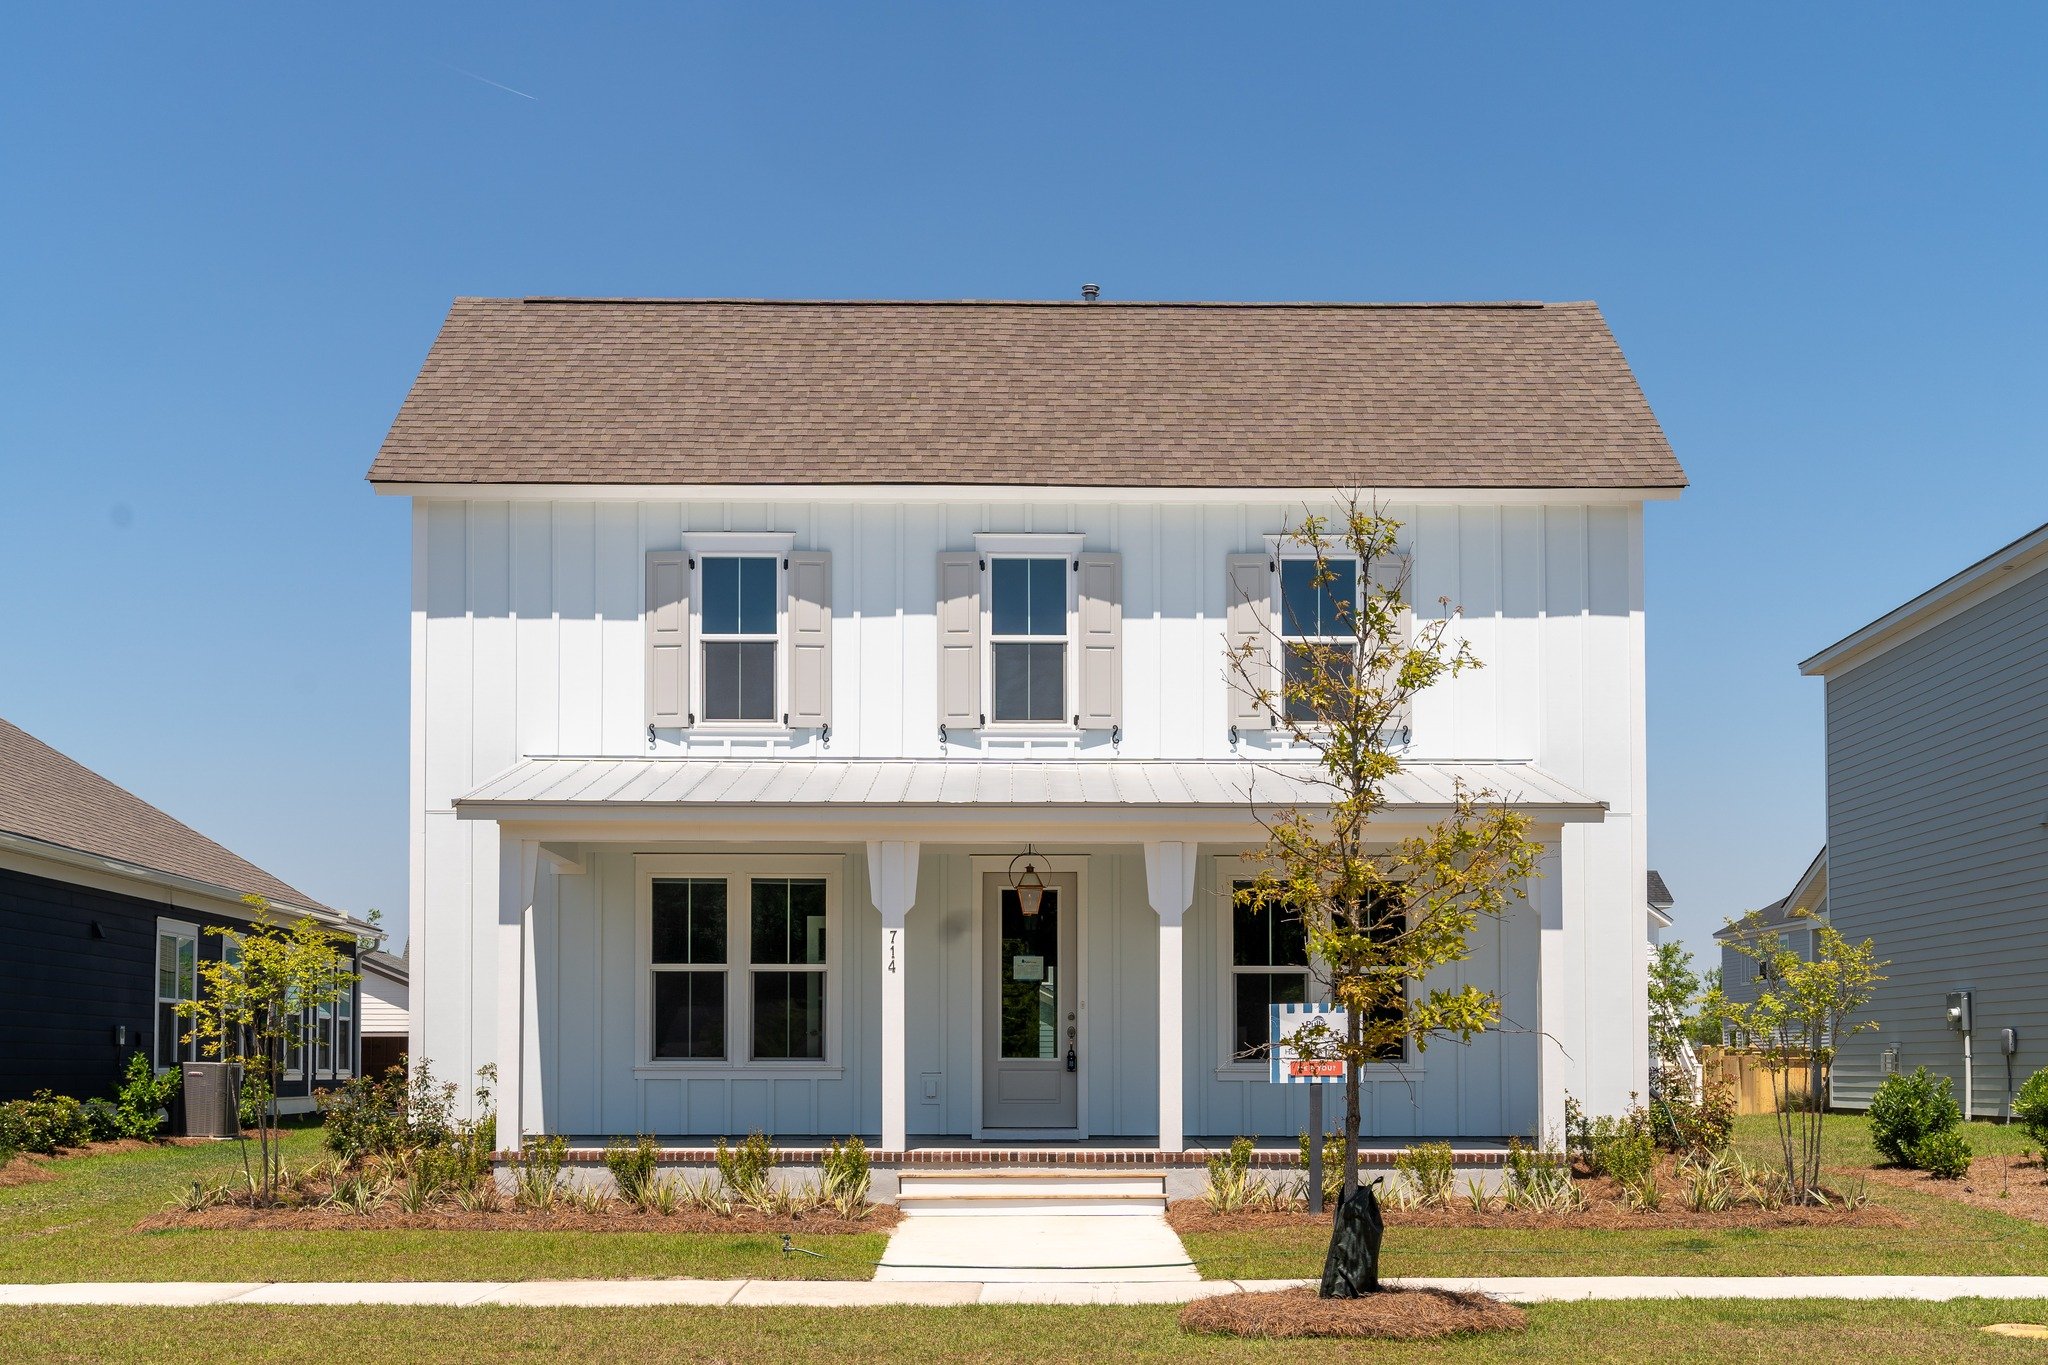 Pulte Homes in Nexton offers gorgeous Lowcountry designs &amp; amenity-rich living.

Open floor plans, convenient location &amp; Pulte quality!  #NextonSummerville #NewConstruction @pultehomes 

P.S. Showcase your dream home with our photography! 
📸